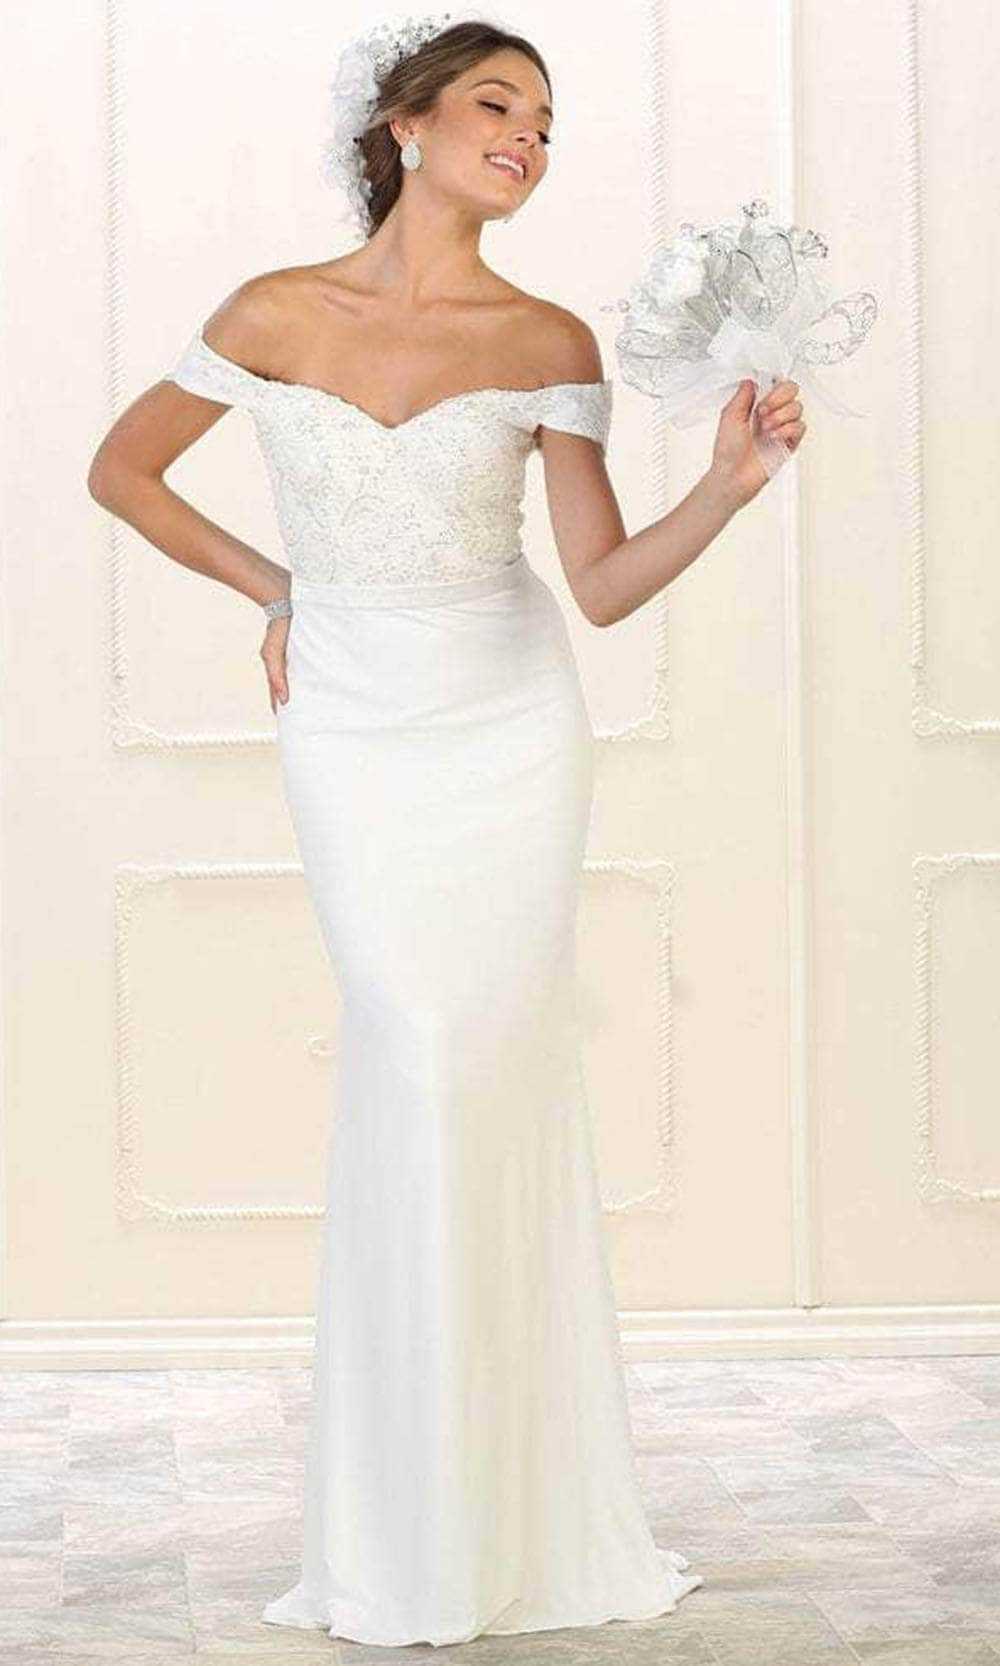 May Queen, May Queen MQ1529 - Appliqued Trumpet Long Gown